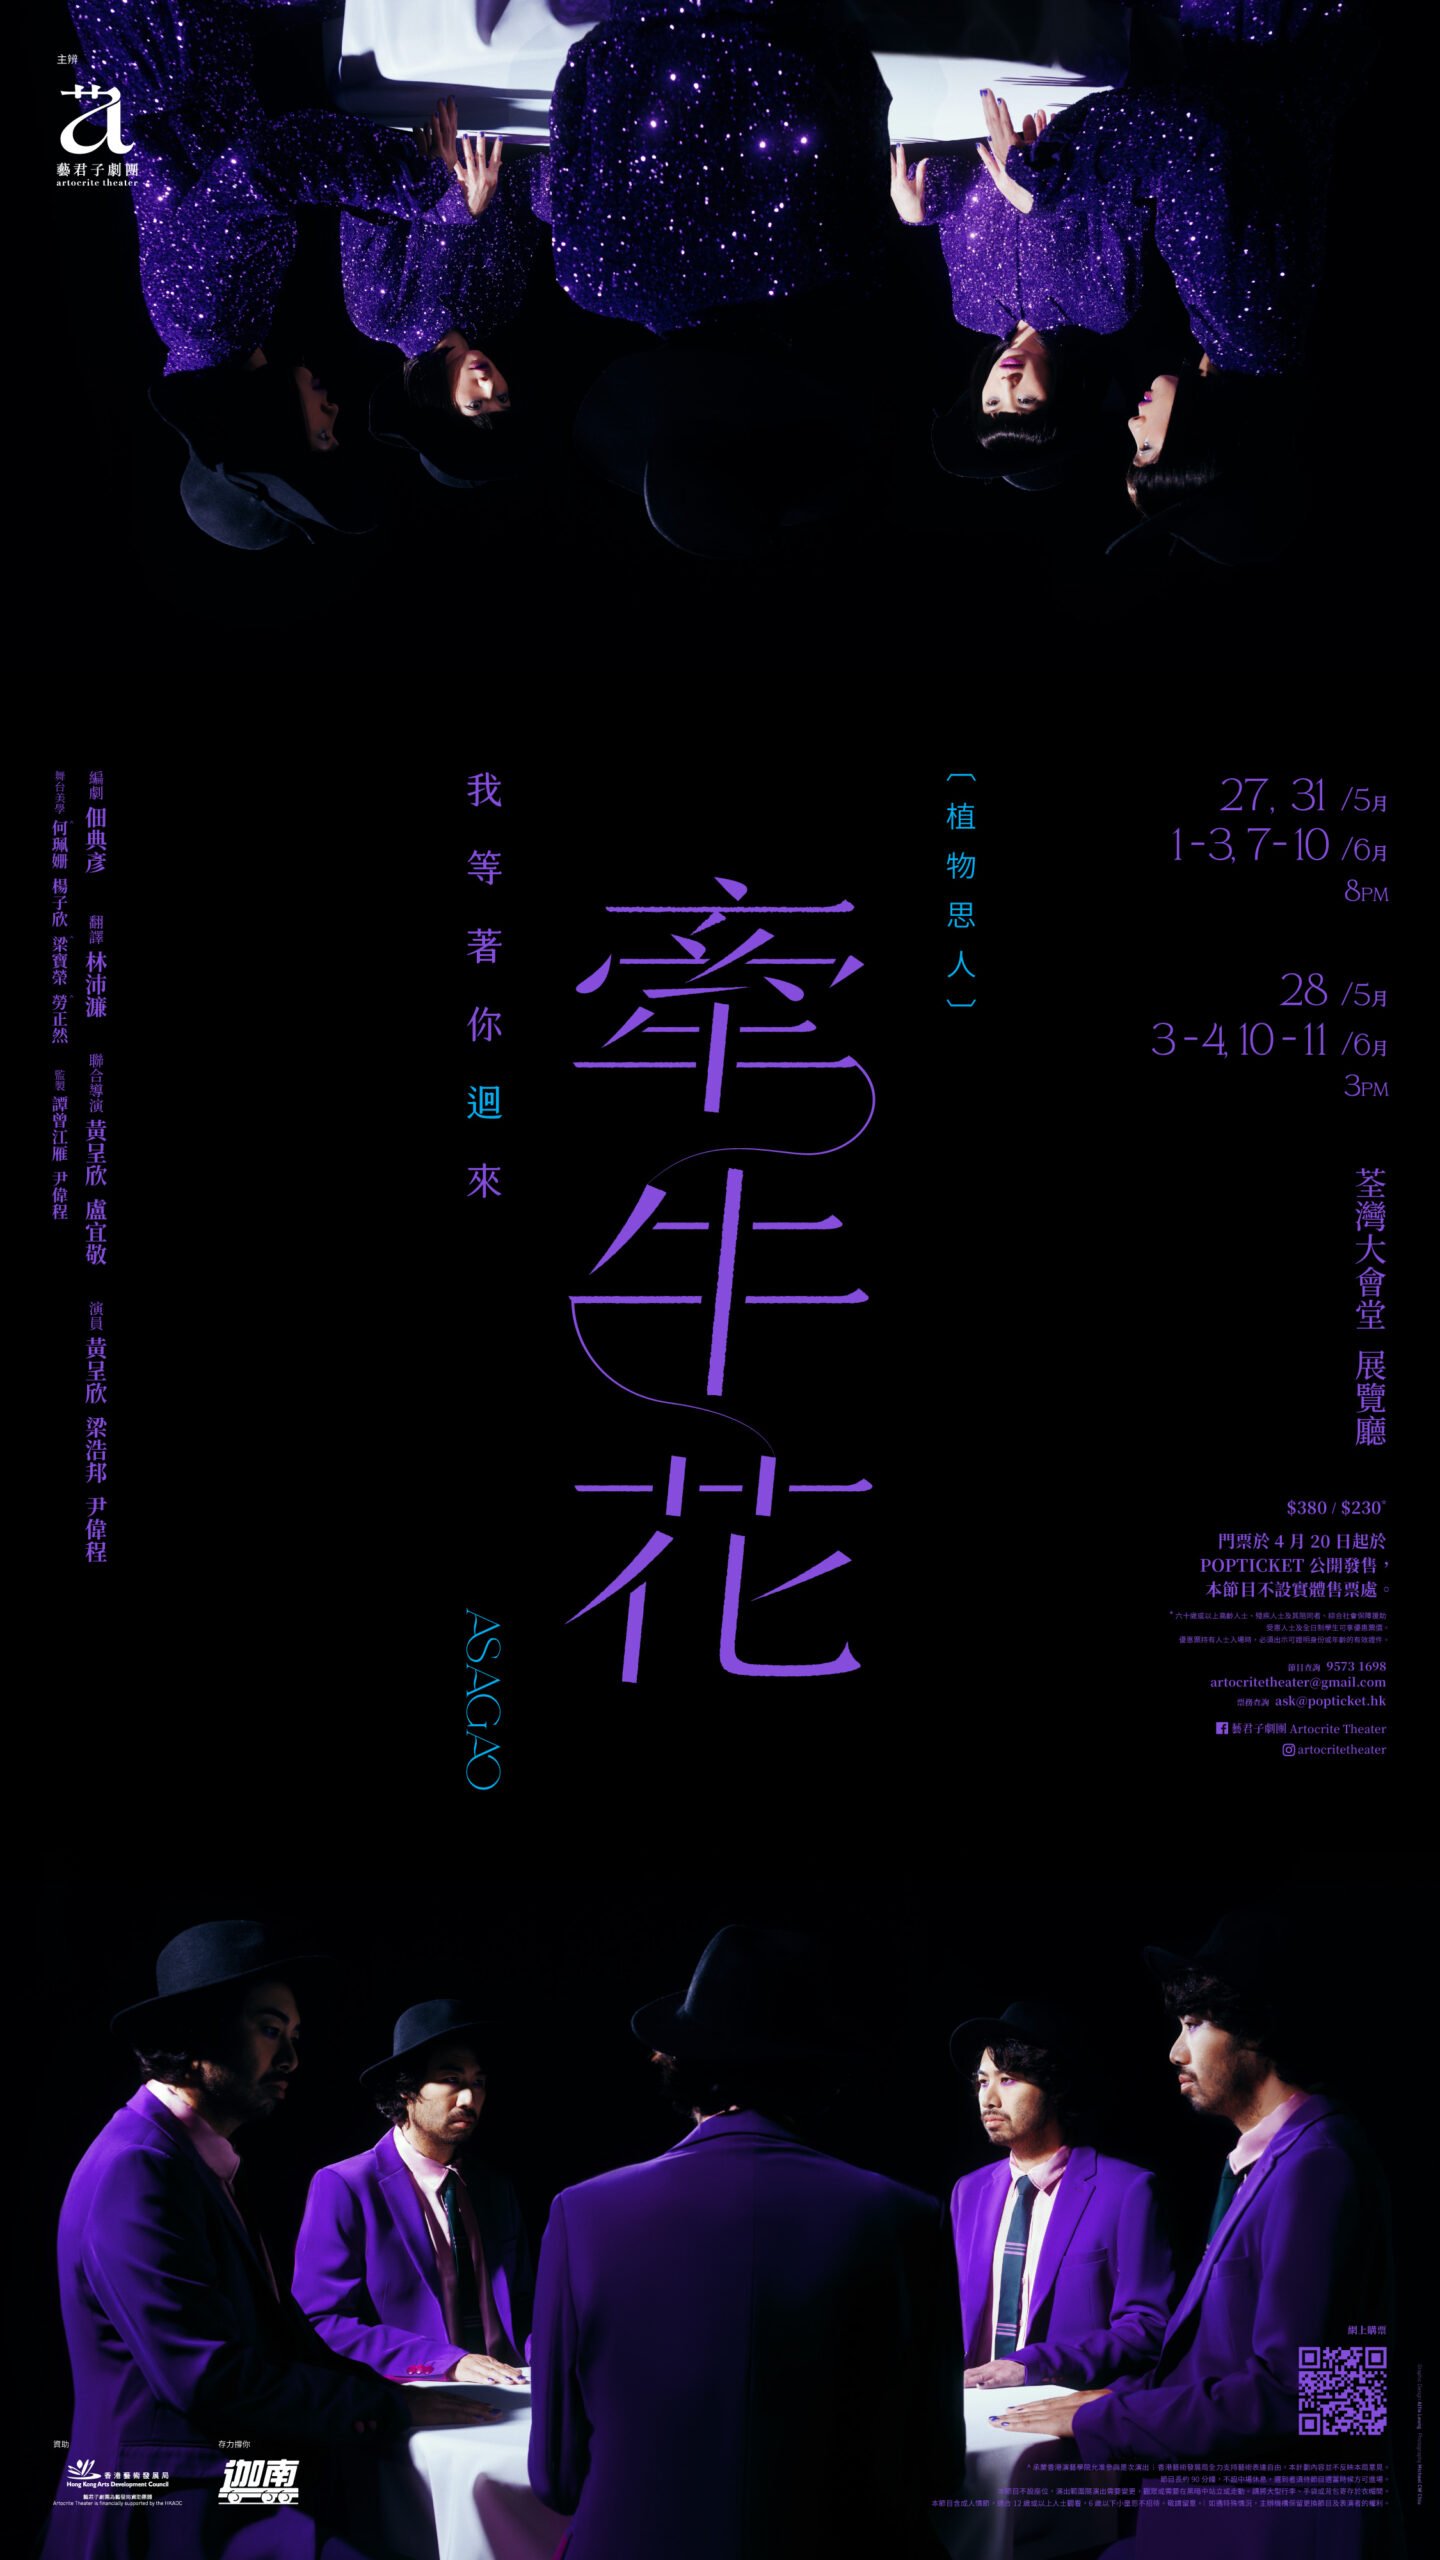 Asagao_poster_1080x1920px-03-scaled.jpg